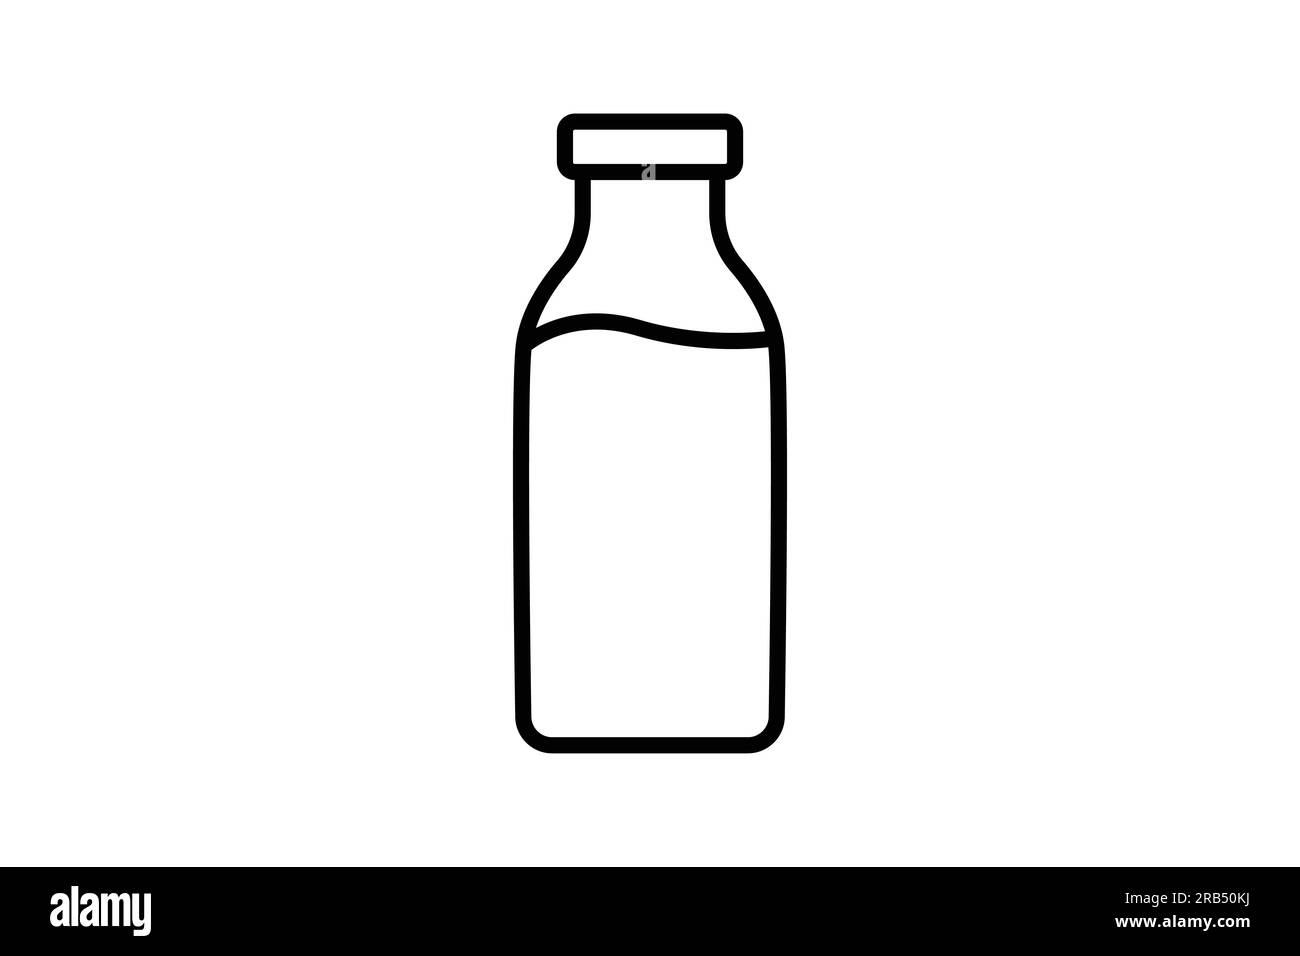 Dairy icon. icon related to element of bakery, drink. Line icon style design. Simple vector design editable Stock Vector